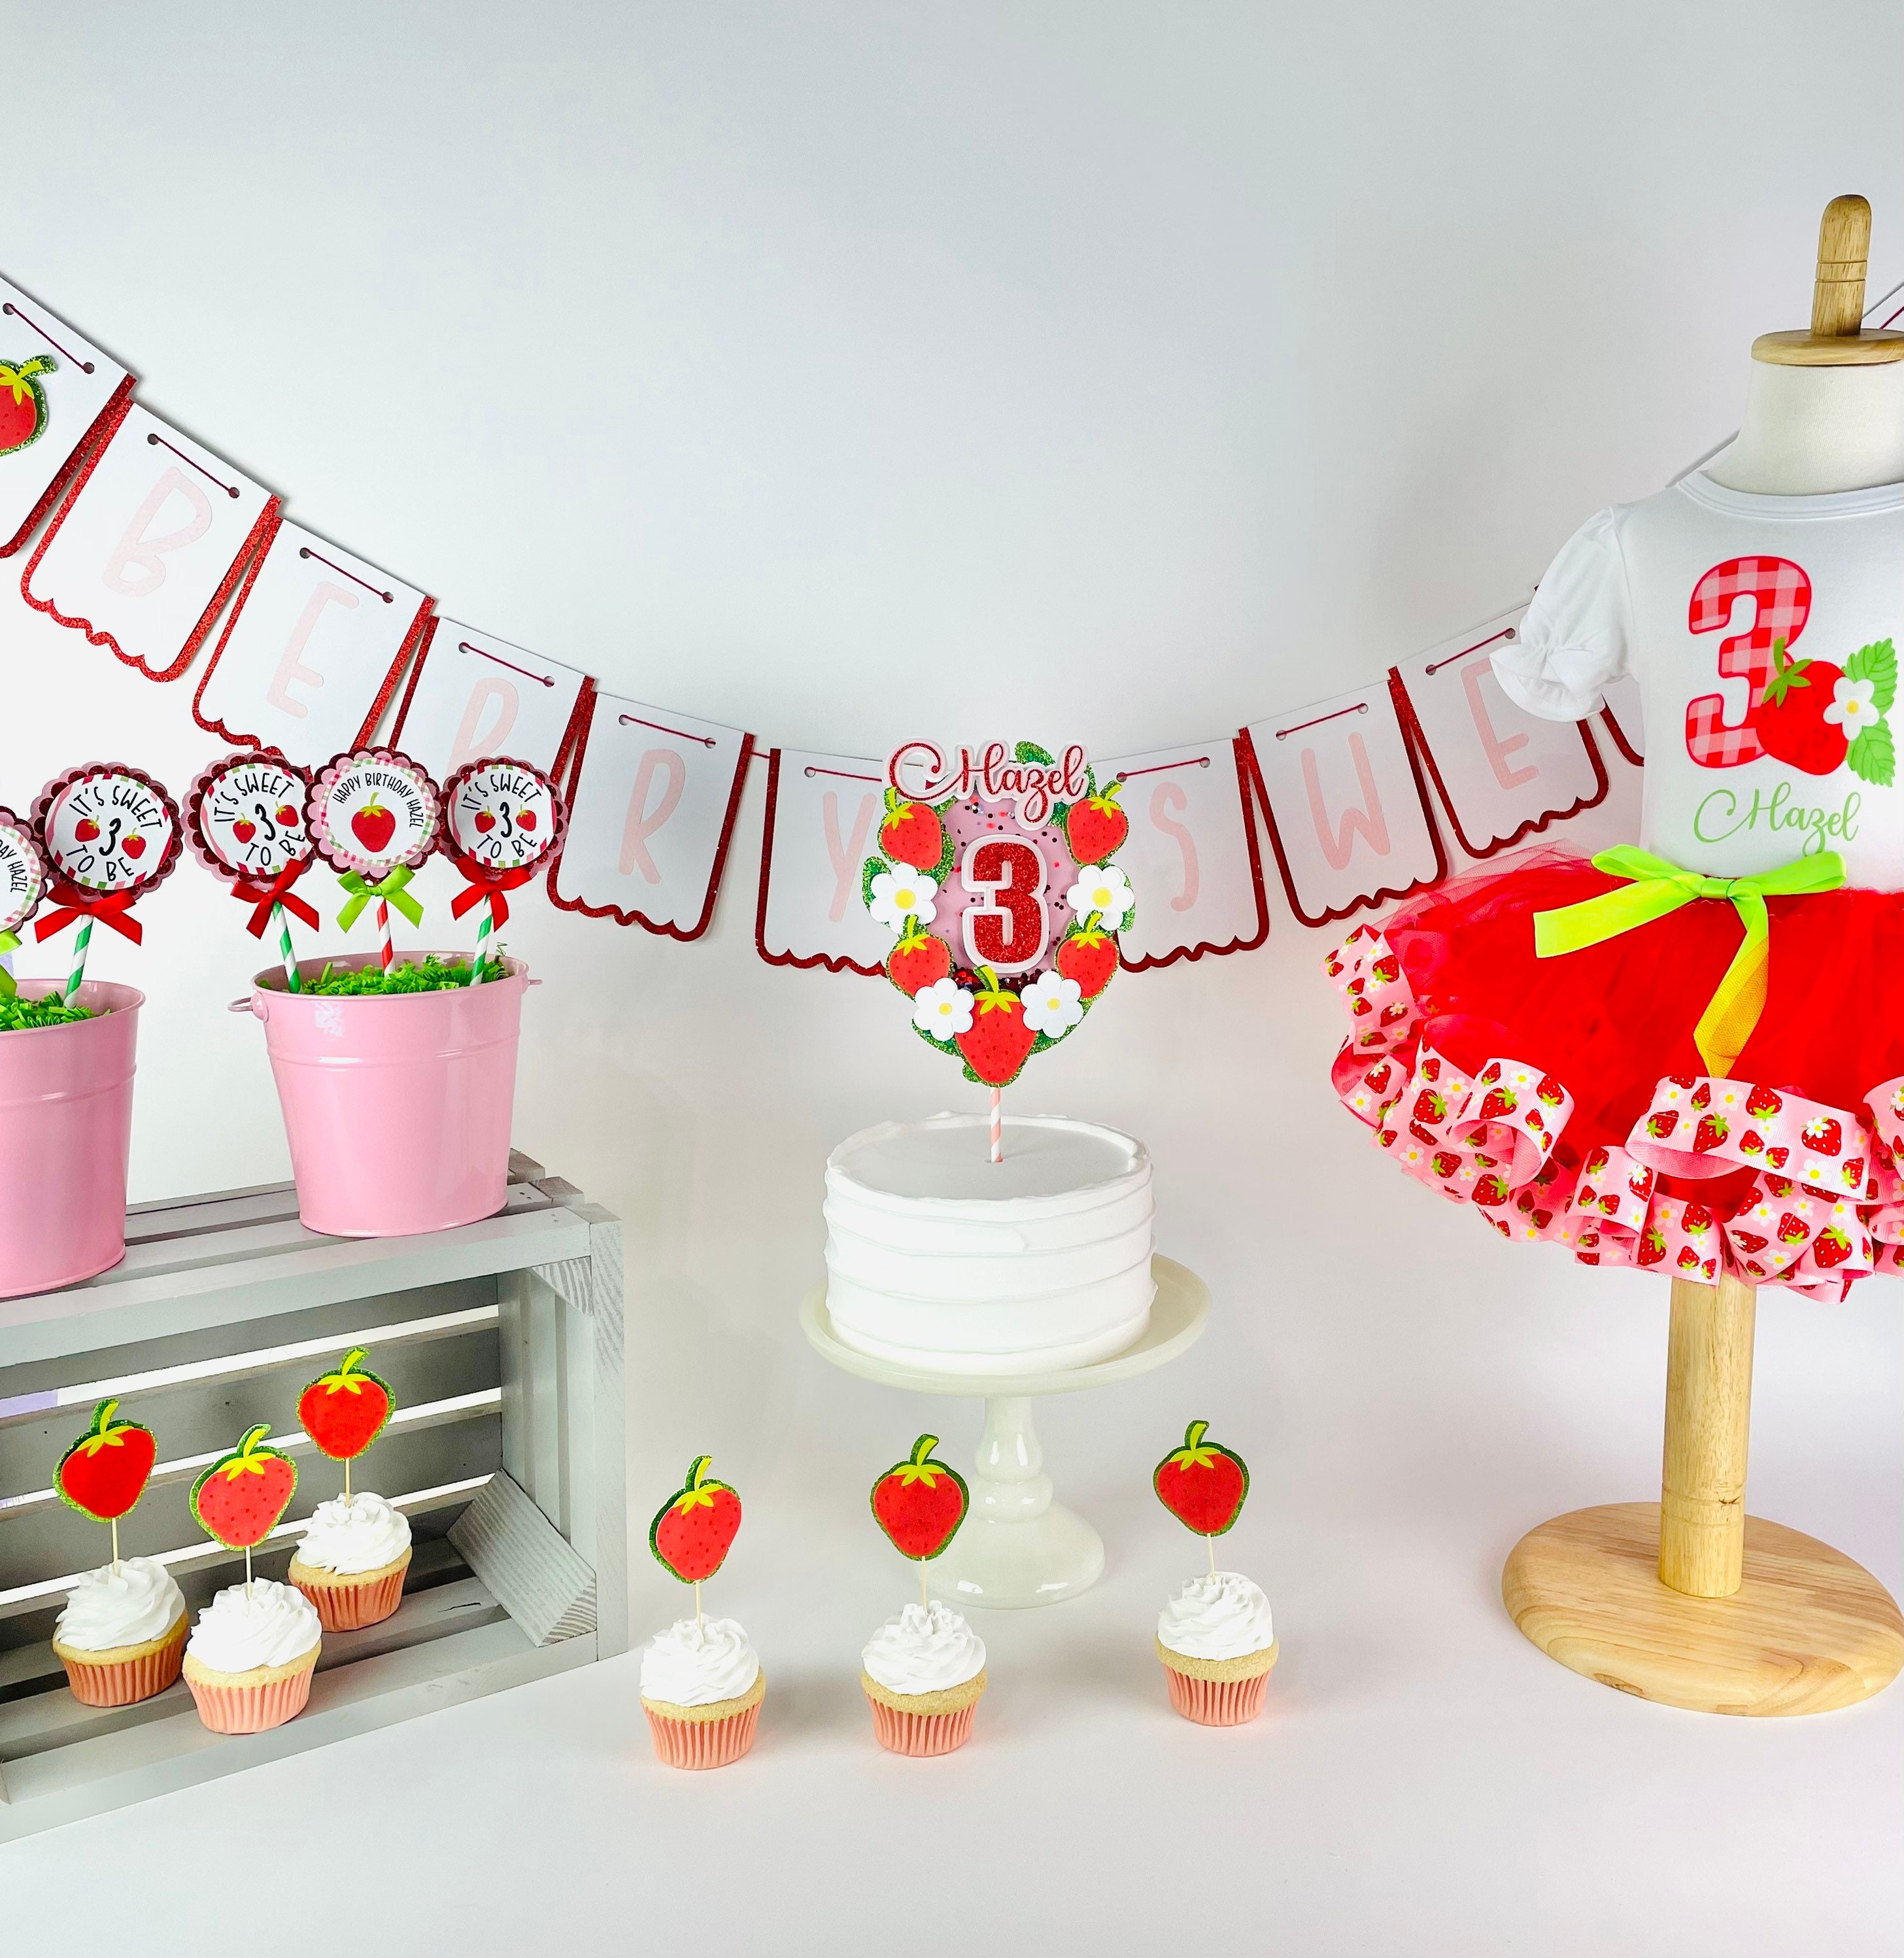 Summer garden party theme – Table decorating ideas with strawberries